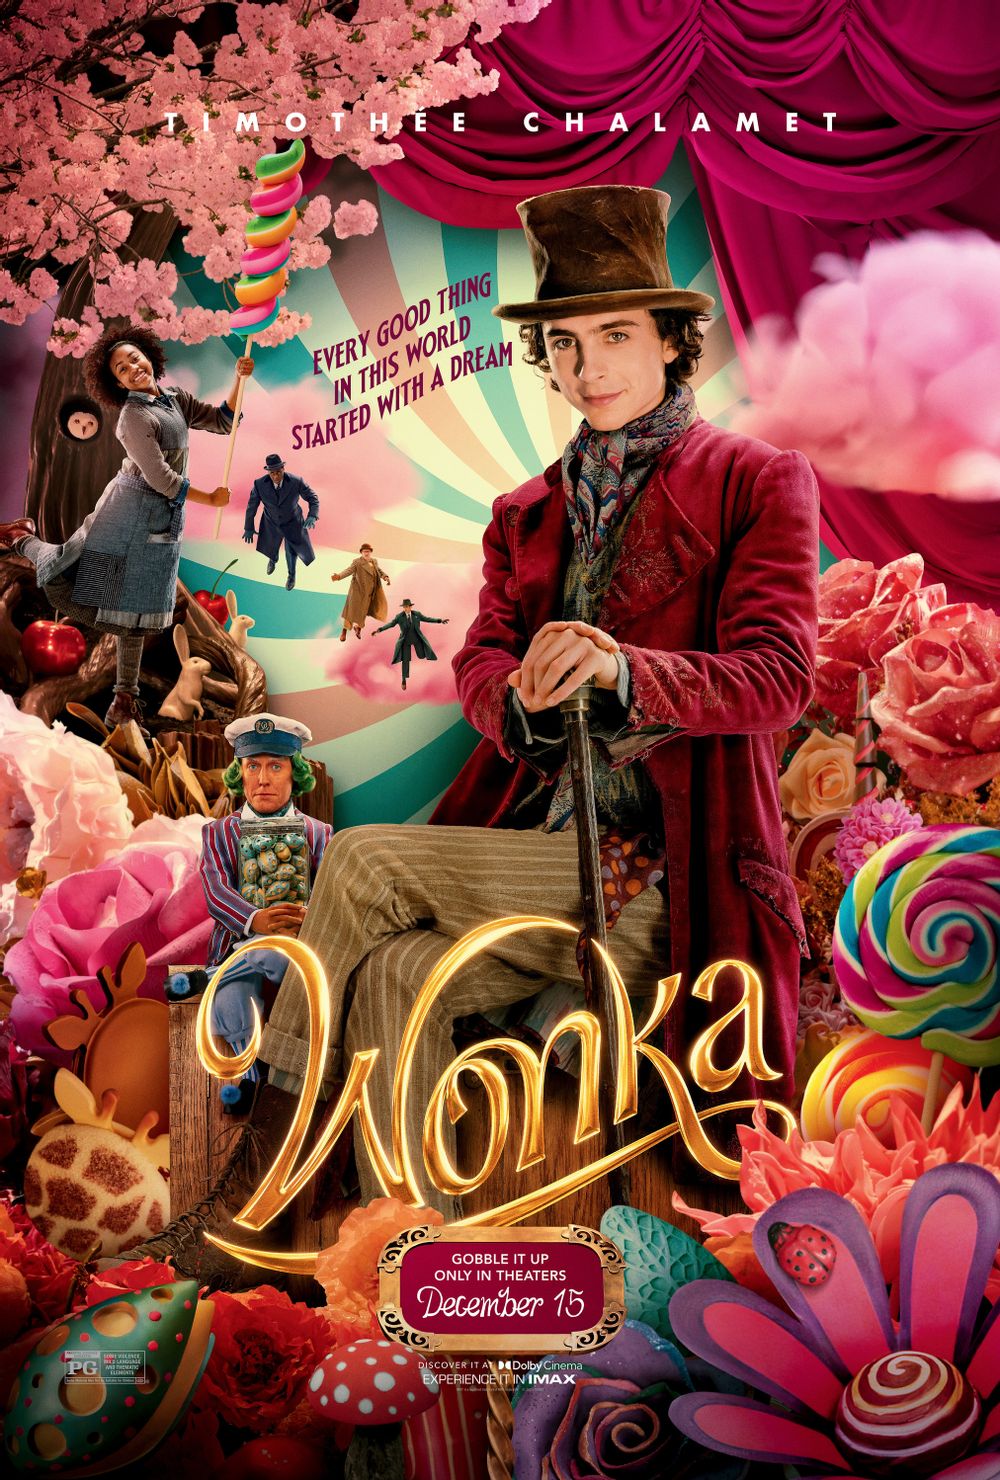 A new Willy Wonka film is being planned and they're eyeing a director with  a great track record